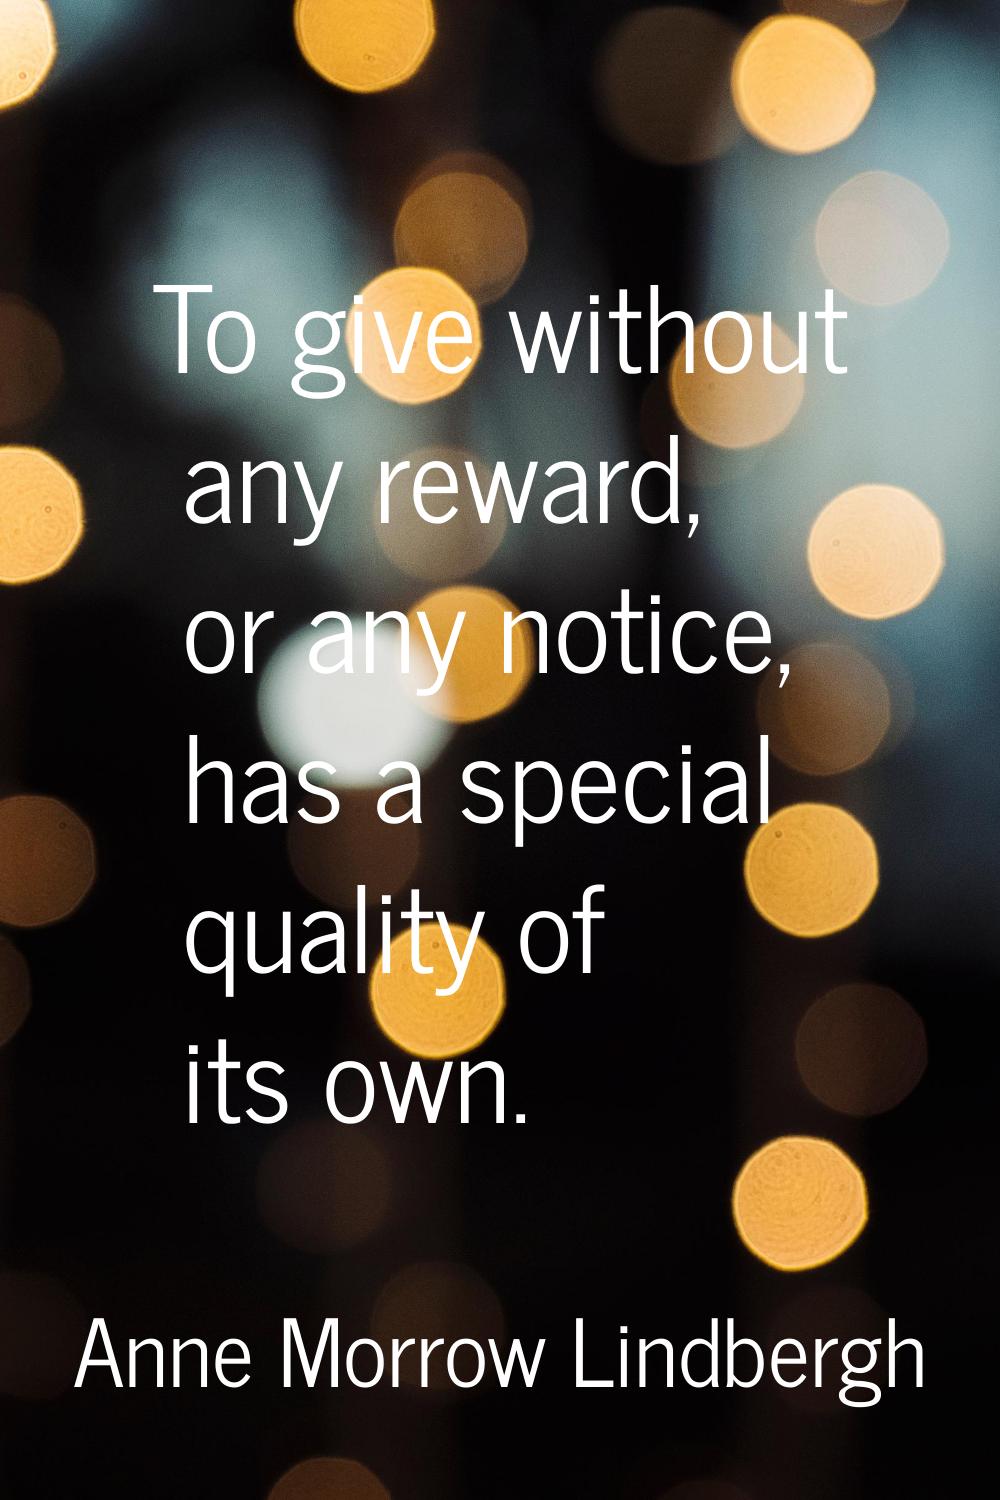 To give without any reward, or any notice, has a special quality of its own.